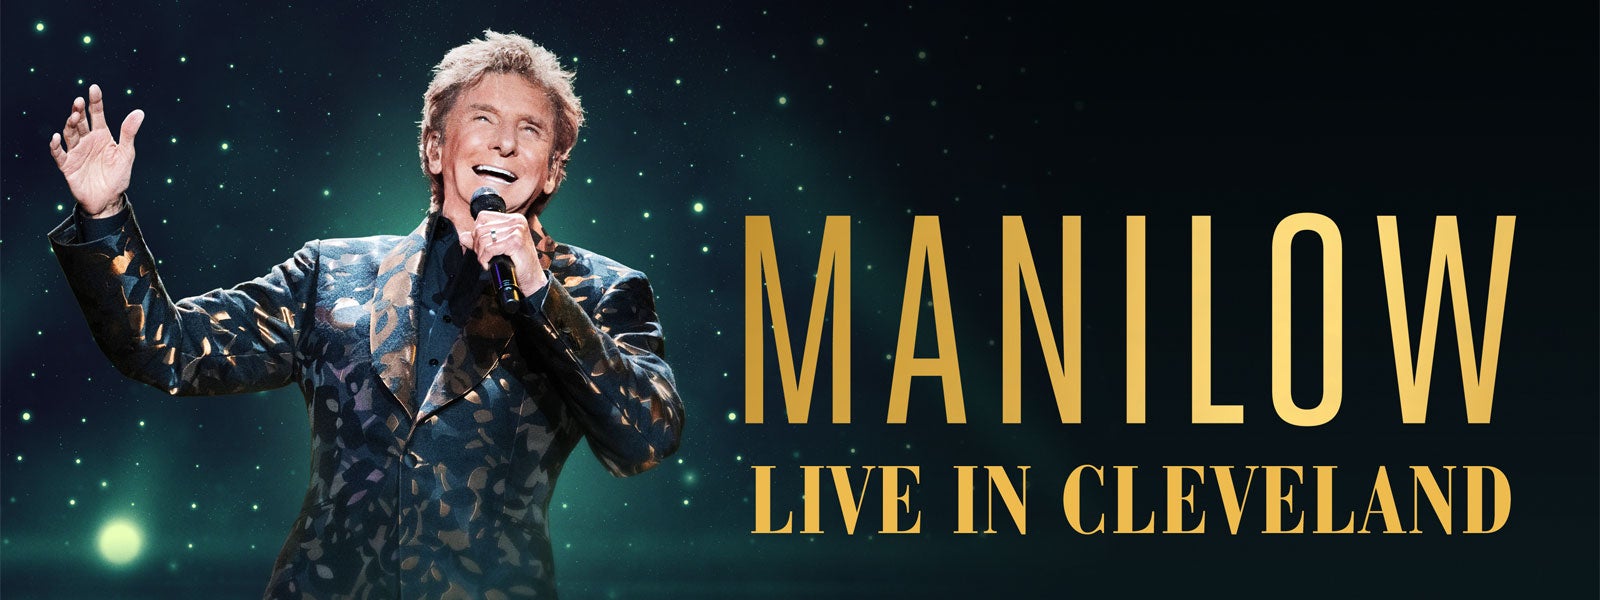 Barry Manilow: Live in Cleveland!